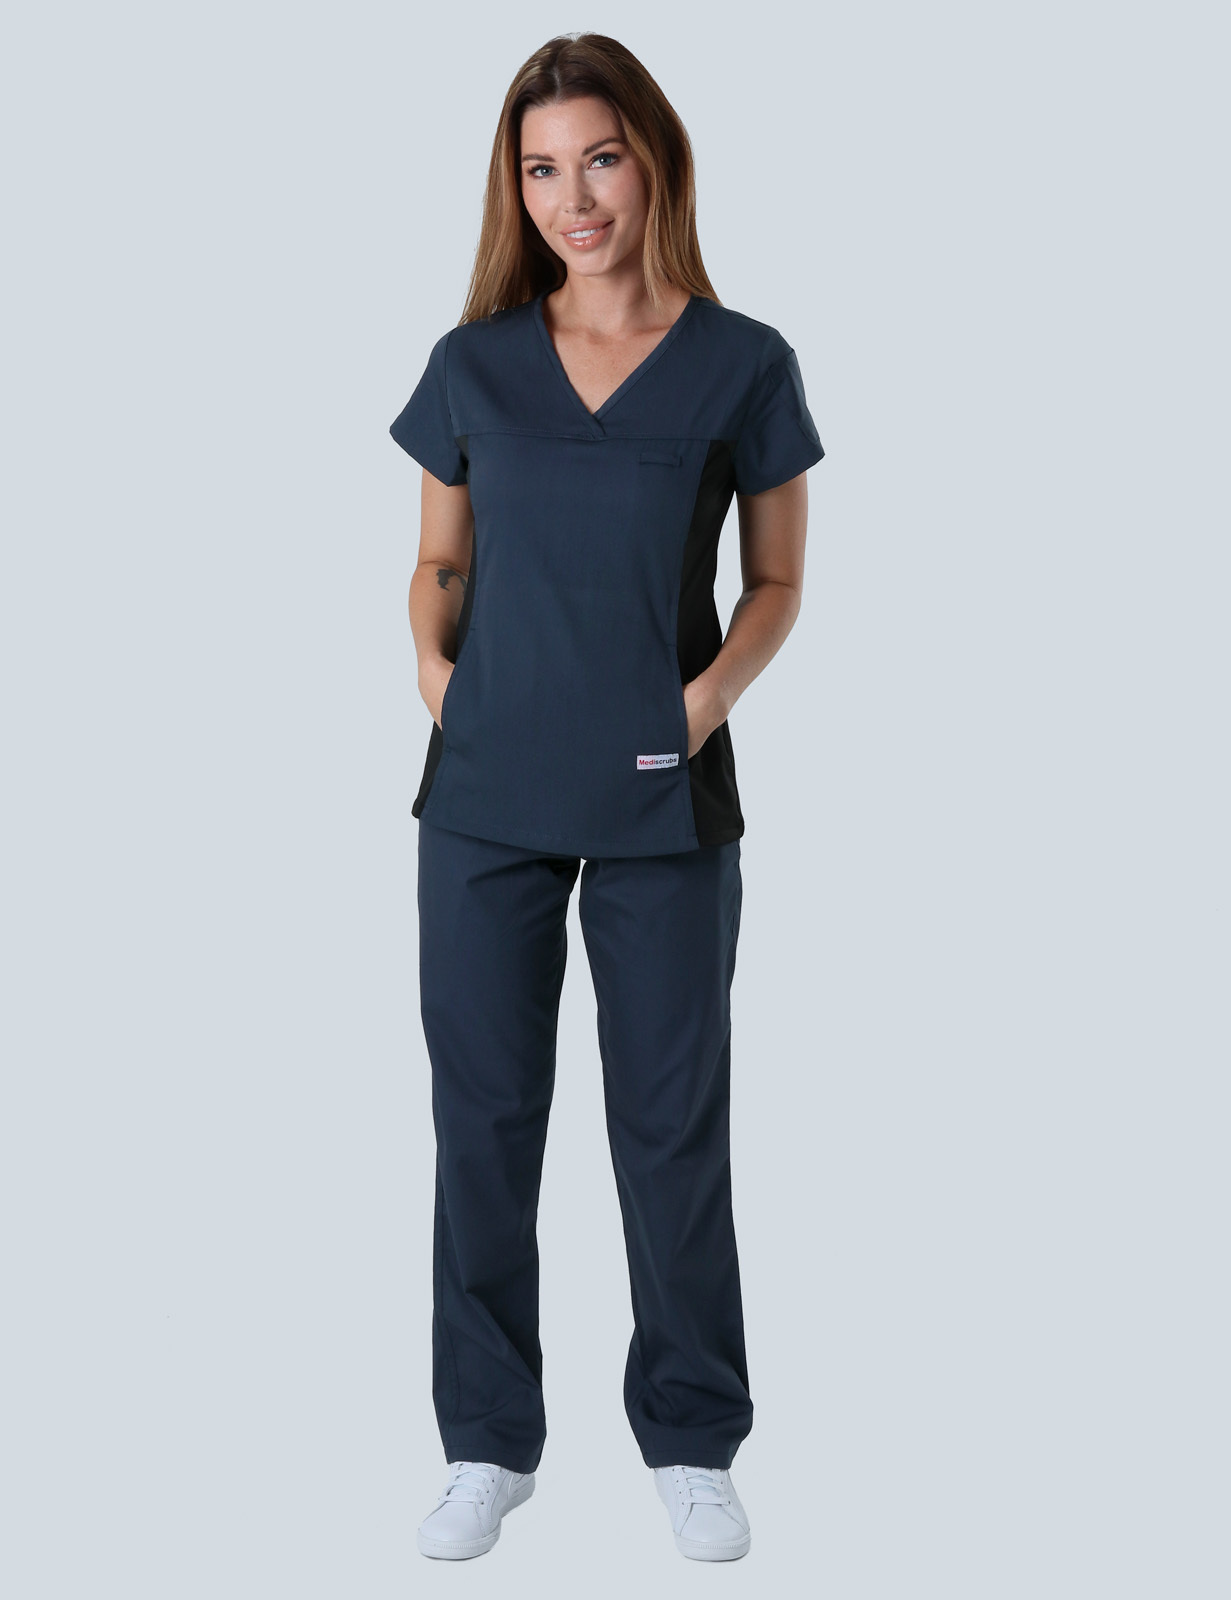 Women's Fit Solid Scrub Top With Spandex Panel - Navy - 2X Large